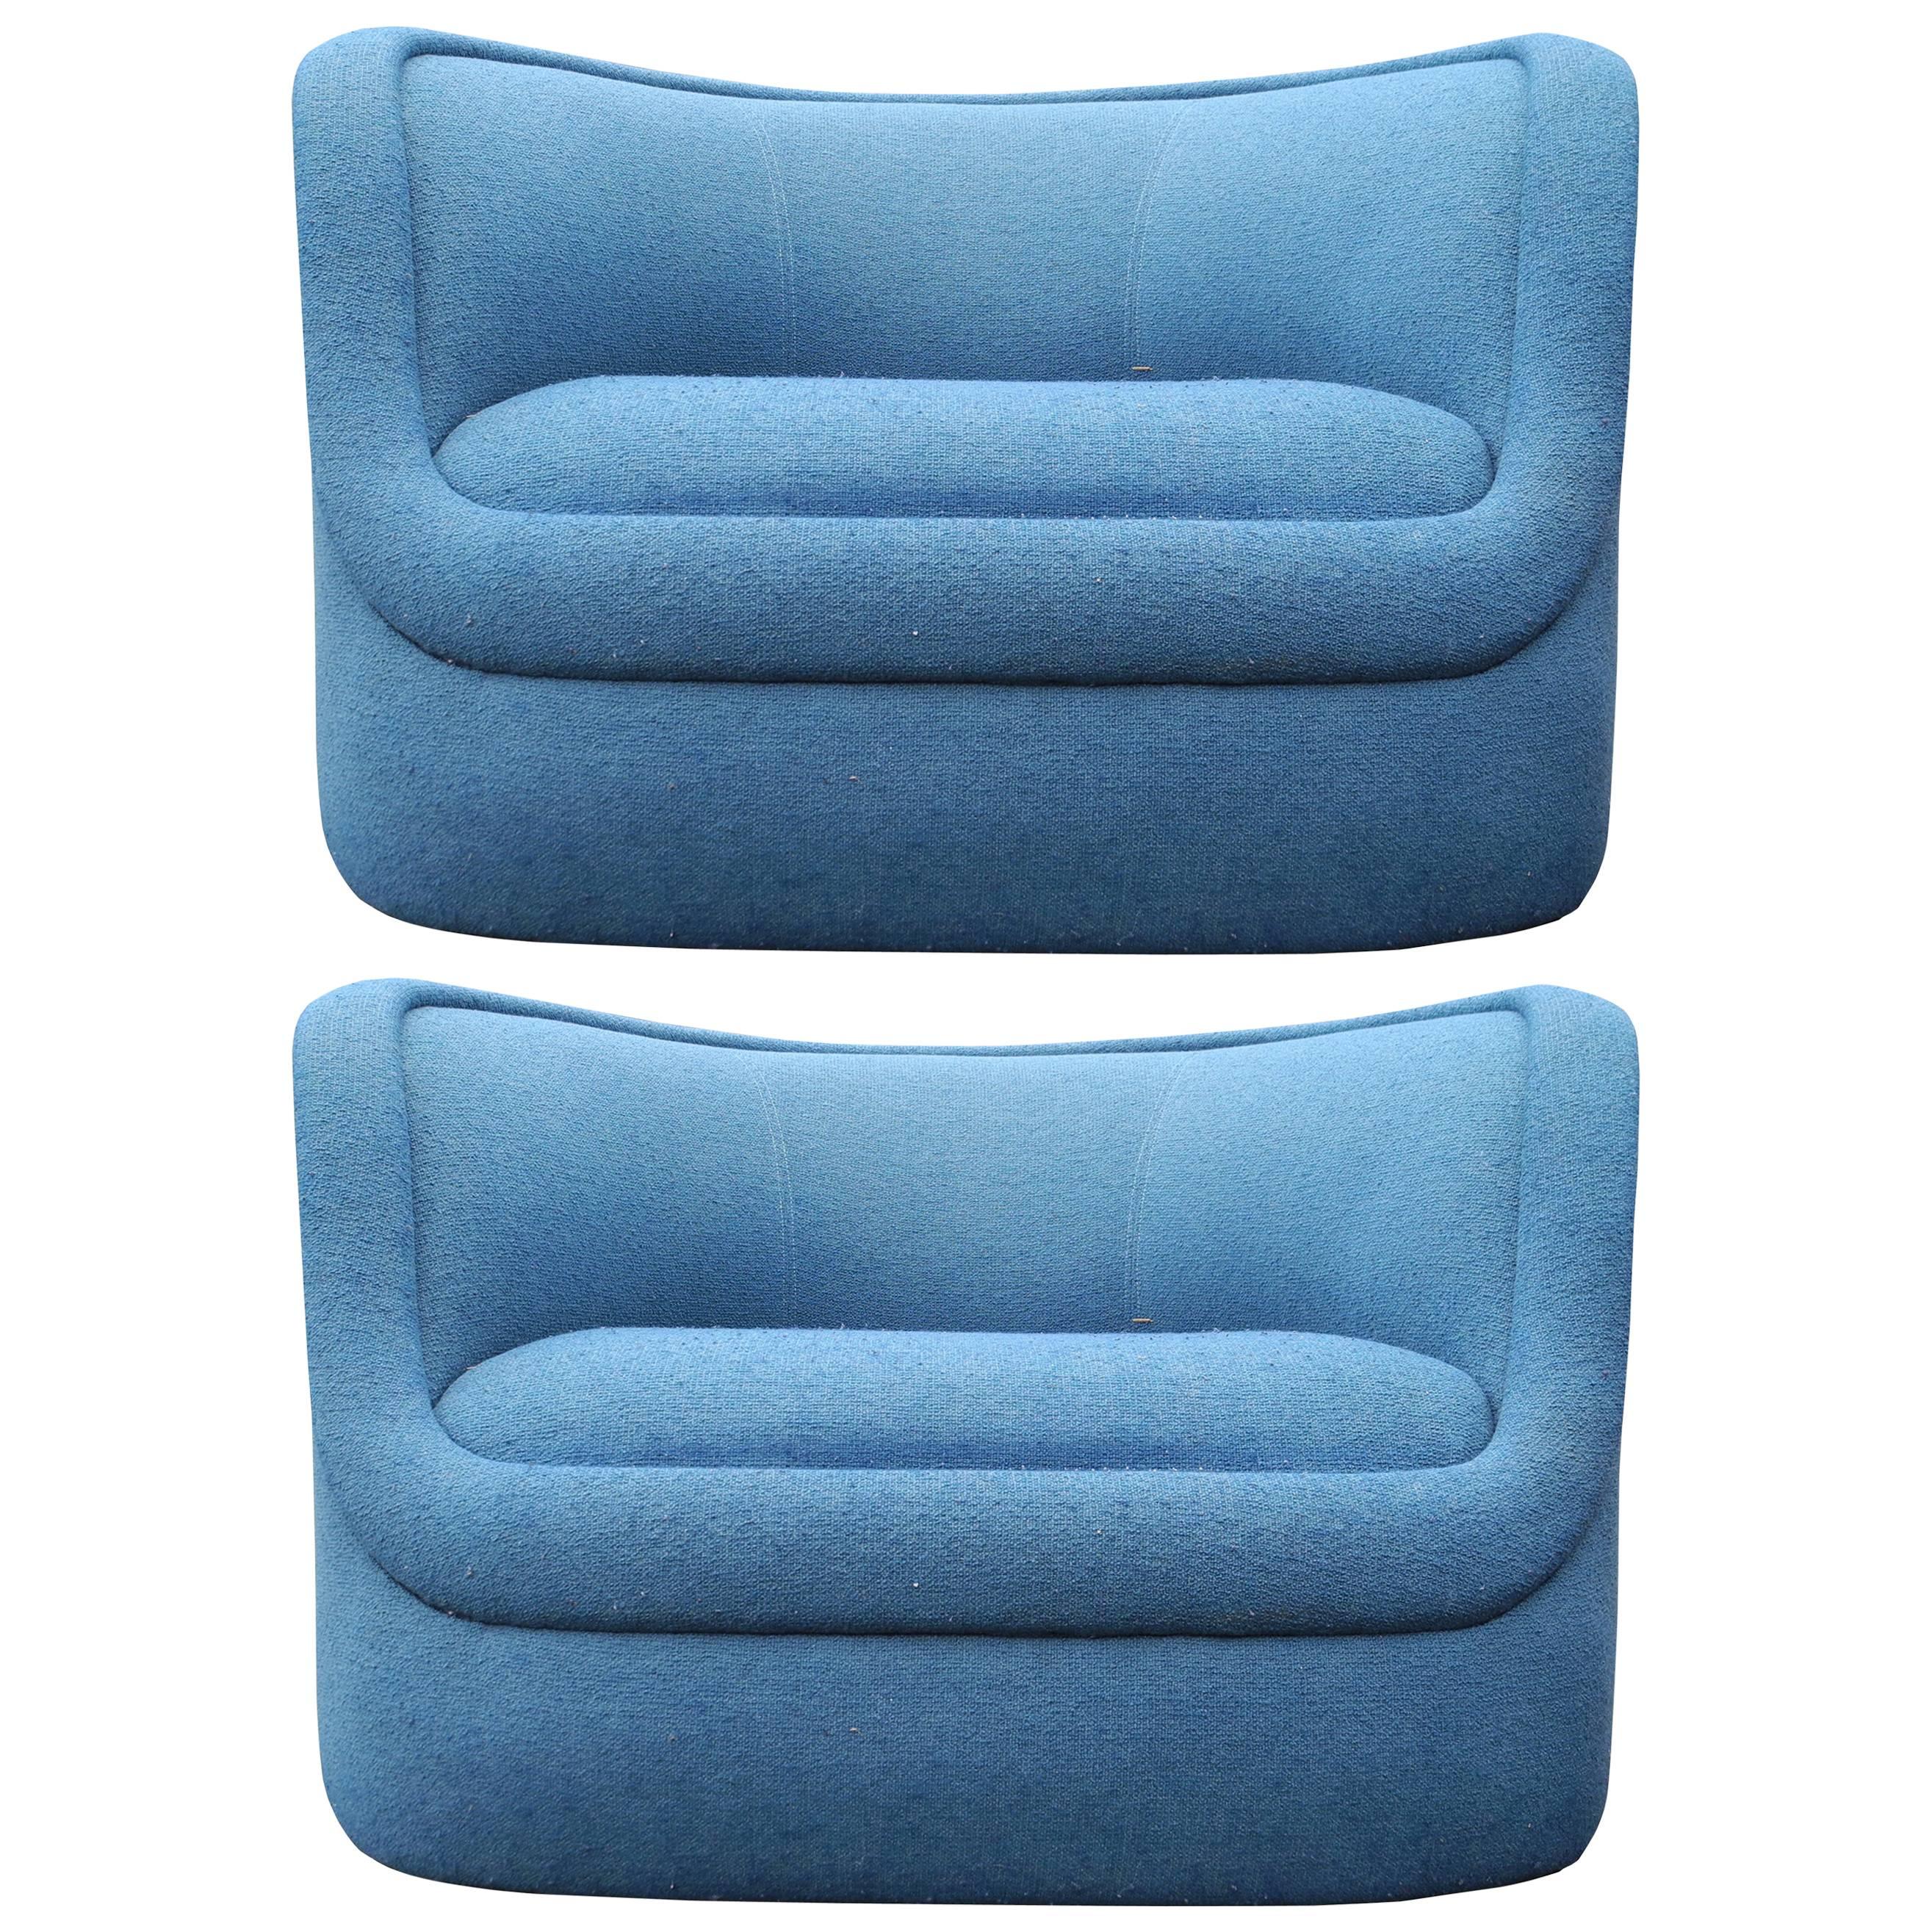 Pair of Modern Biomorphic Lounge Chairs by Ward Bennett for Brickel Associates For Sale